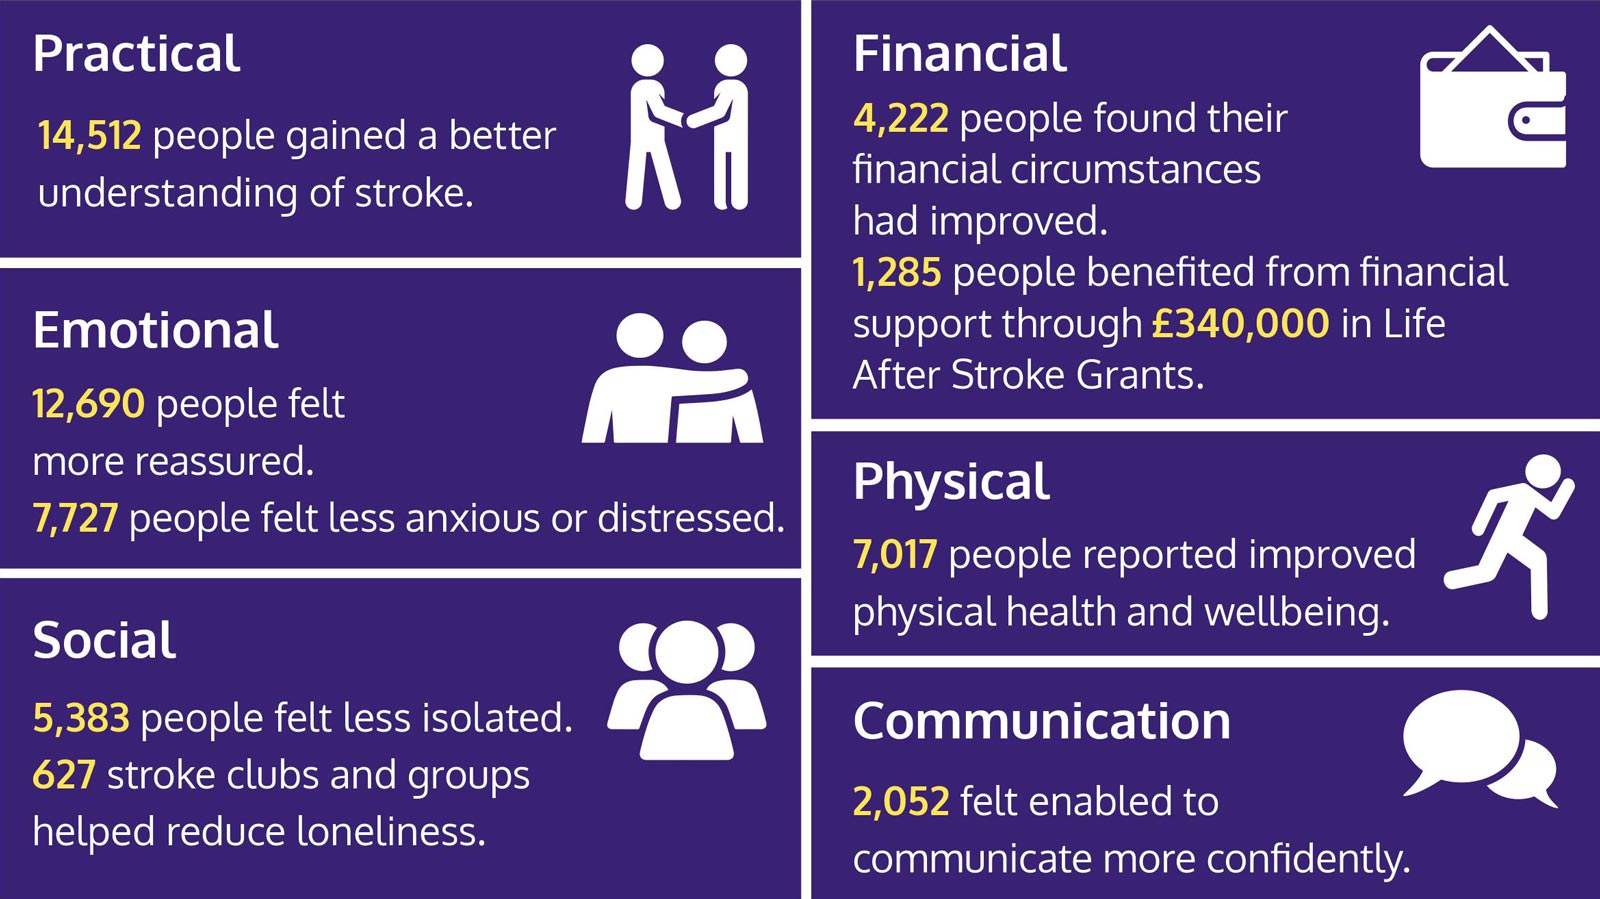 An infographic with a series of statistics:
1. Practical: 14,512 people gained a better understanding of stroke.
2. Emotional 12,690 people feel more reassured. 7.727 people felt less anxious or distressed.
3. Social: 5,383 people felt less isolated. 627 stroke clubs and groups helped reduce loneliness.
4. Financial: 4,222 people found their financial circumstances had improved. 1,285 people benefited from financial support through £340,000 in Life After Stroke Grants.
5. Physical: 7,017 people reported improved physical health and wellbeing.
6. Communication: 2,052 felt enabled to communicate more confidently.